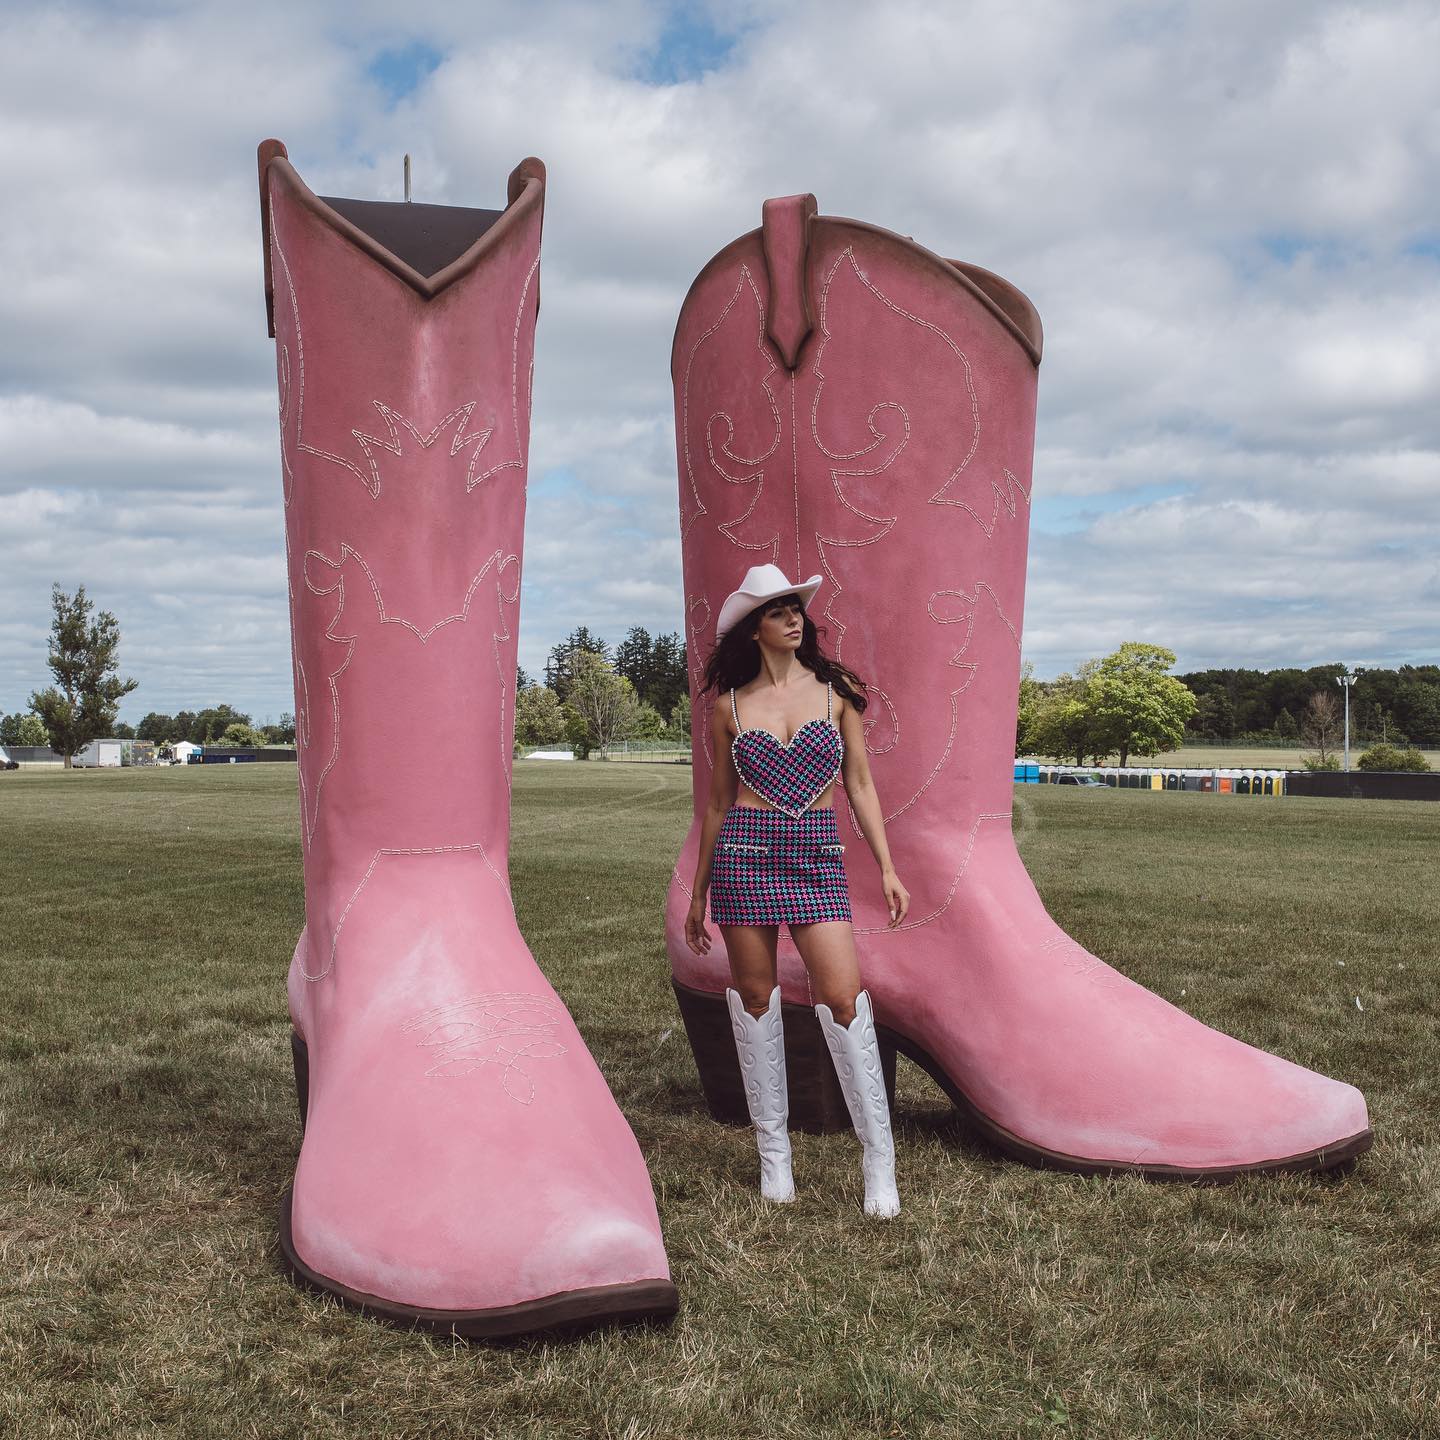 A pair of giant pink cowboy boots. In the middle is Briony Douglas wearing a dress, white cowboy hat and matching white cowboy boots.